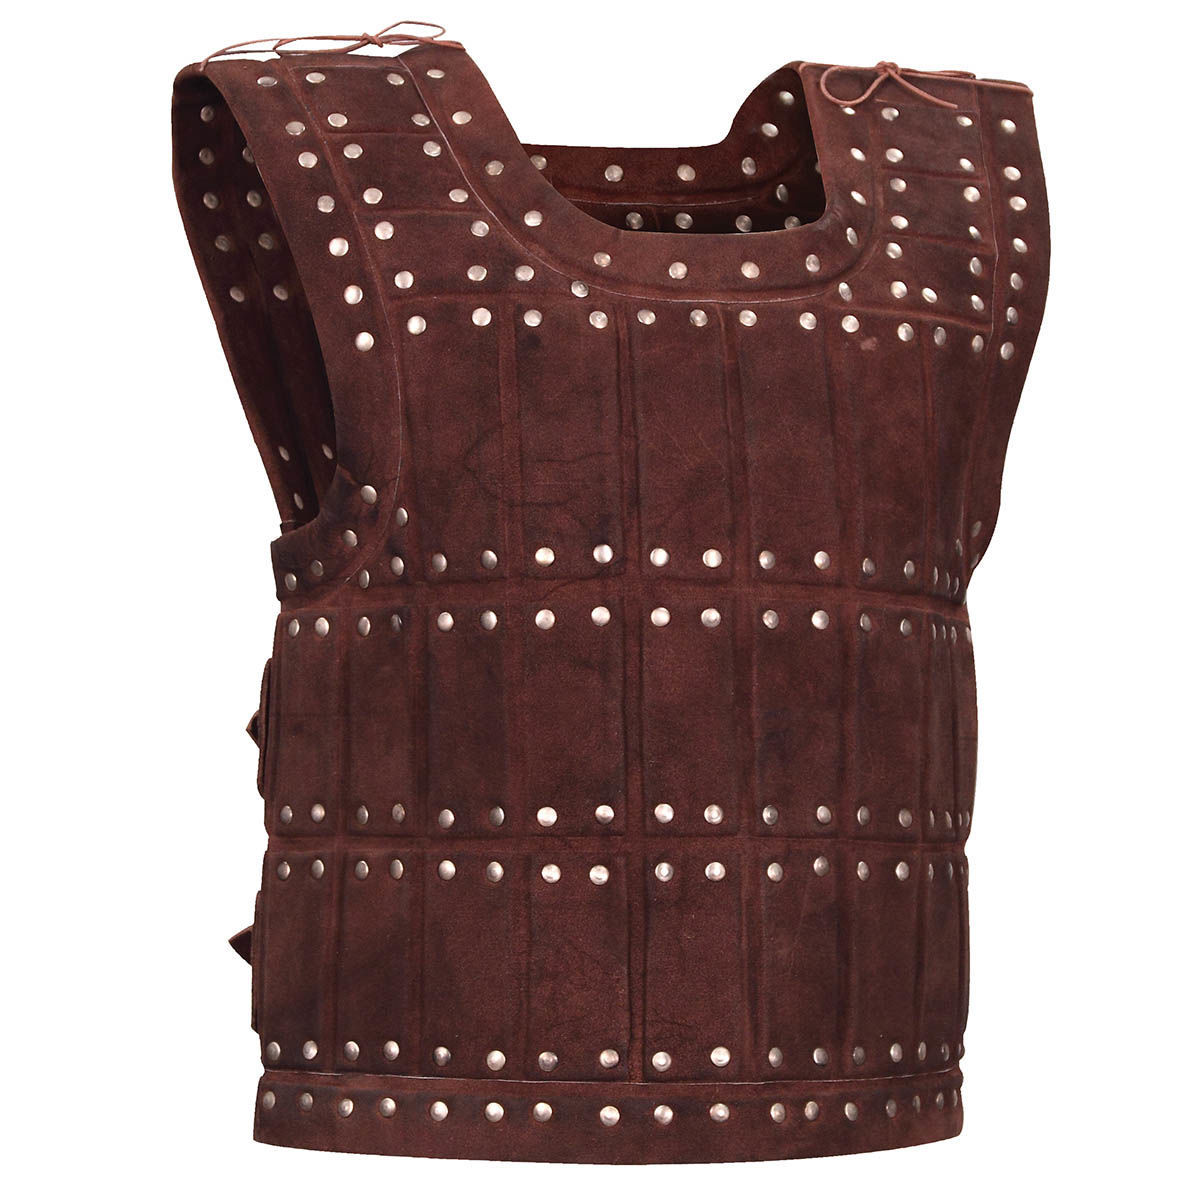 suede leather historical armor vest with padded design for extra protection and two adjustable buckle straps in the back 